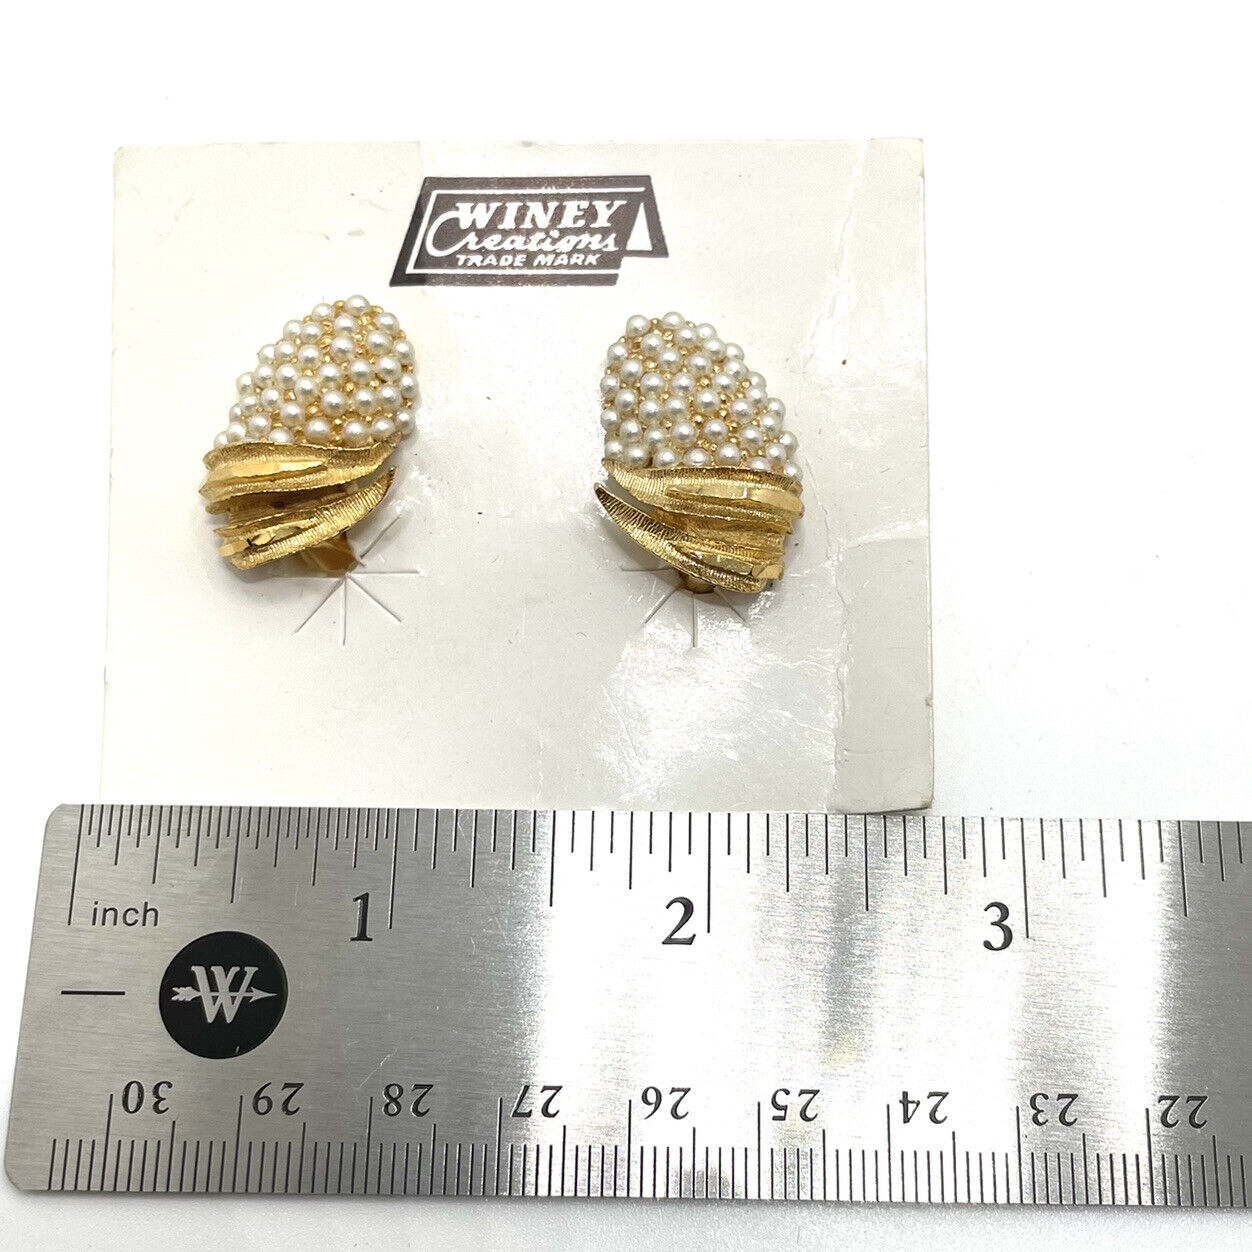 Vintage Winey Creations Gold Tone & Faux Pearl Clip Earrings